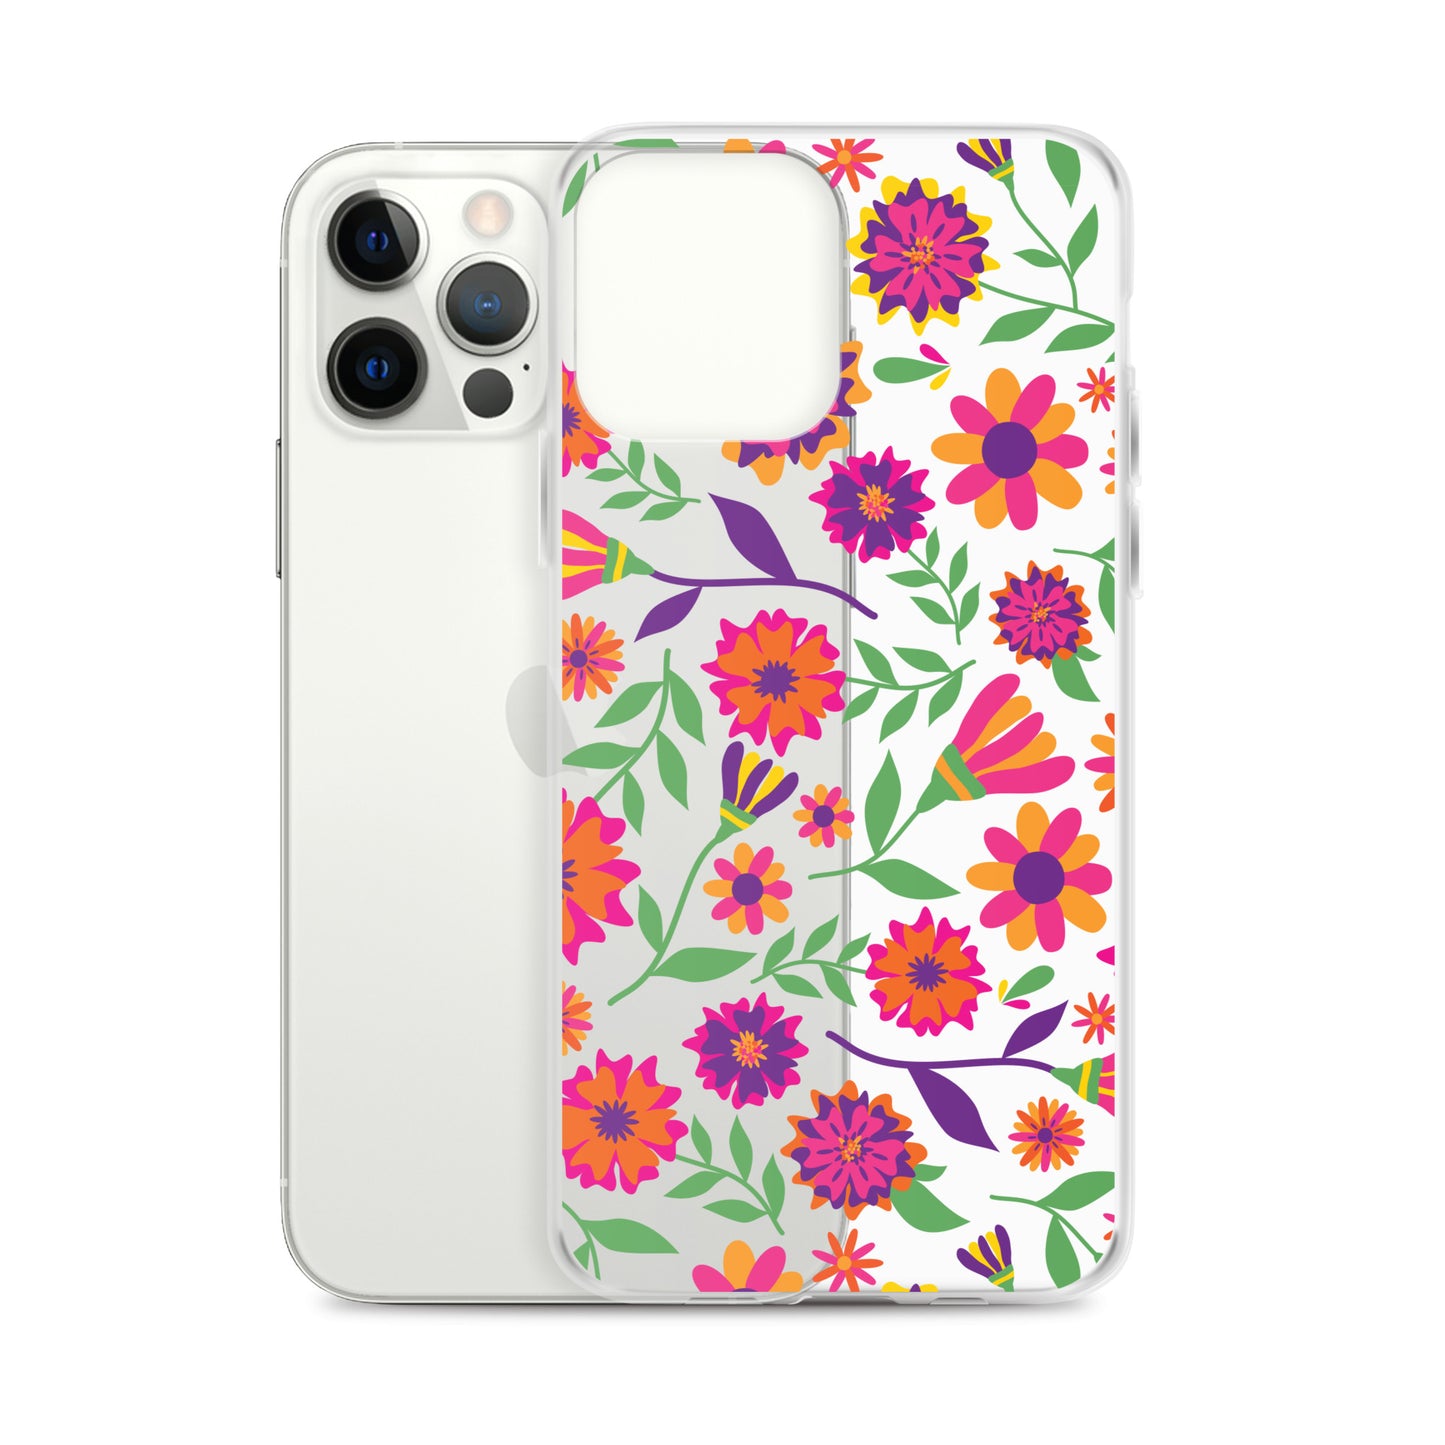 Colorful Floral Pattern iPhone Case